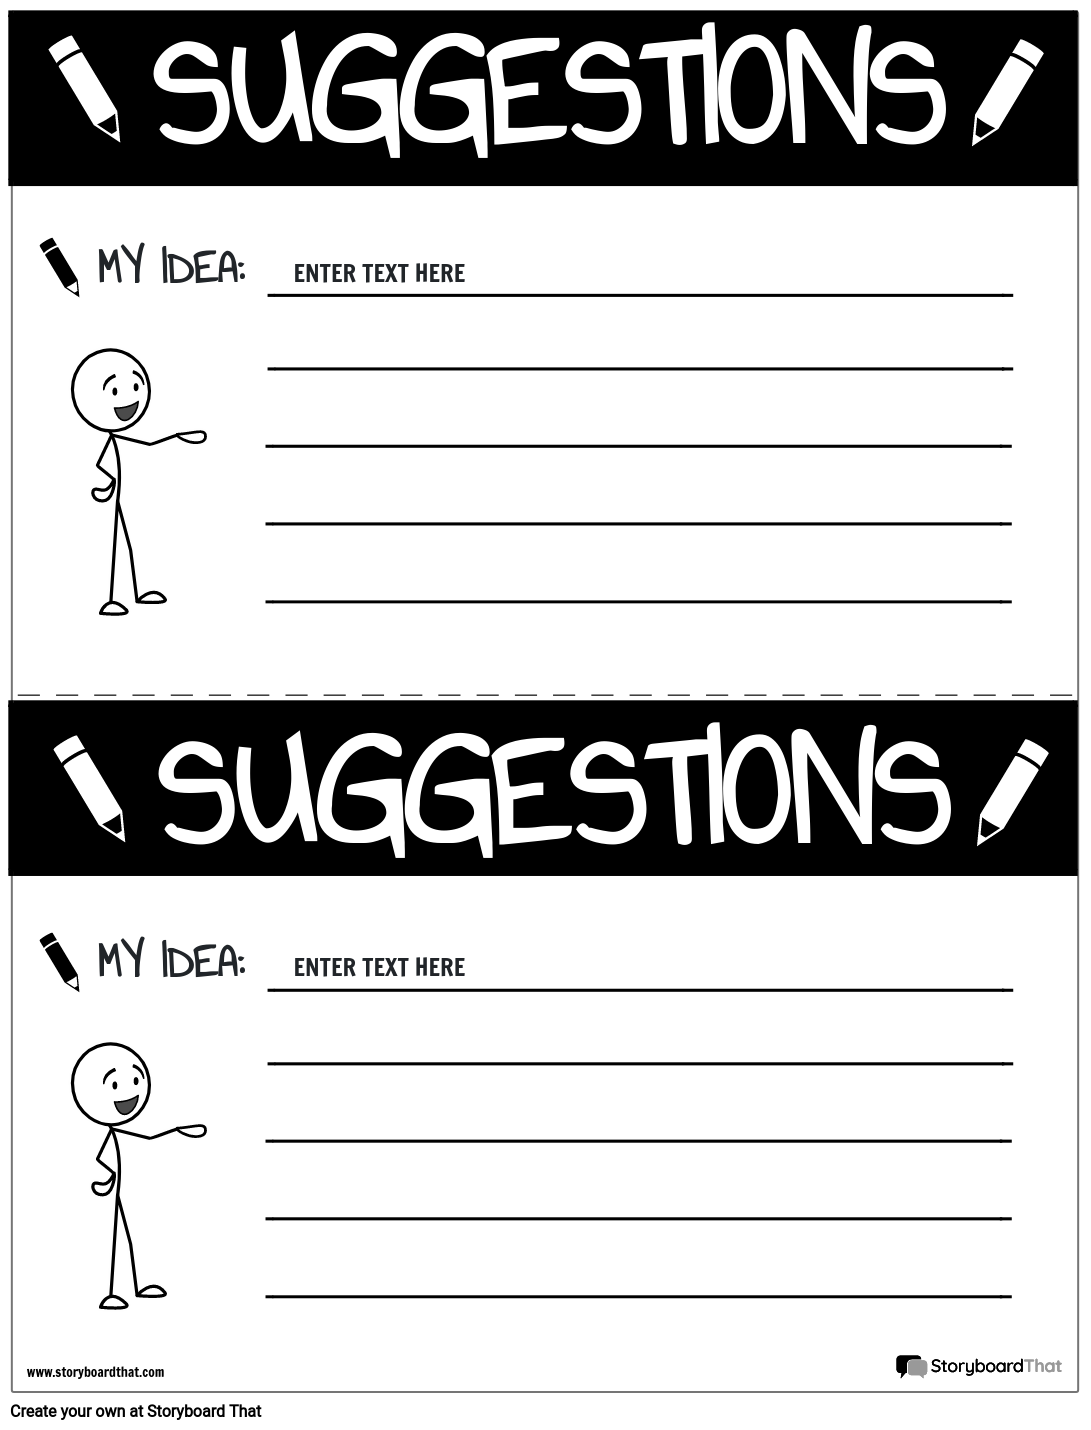 suggestion-slip-4-storyboard-by-worksheet-templates